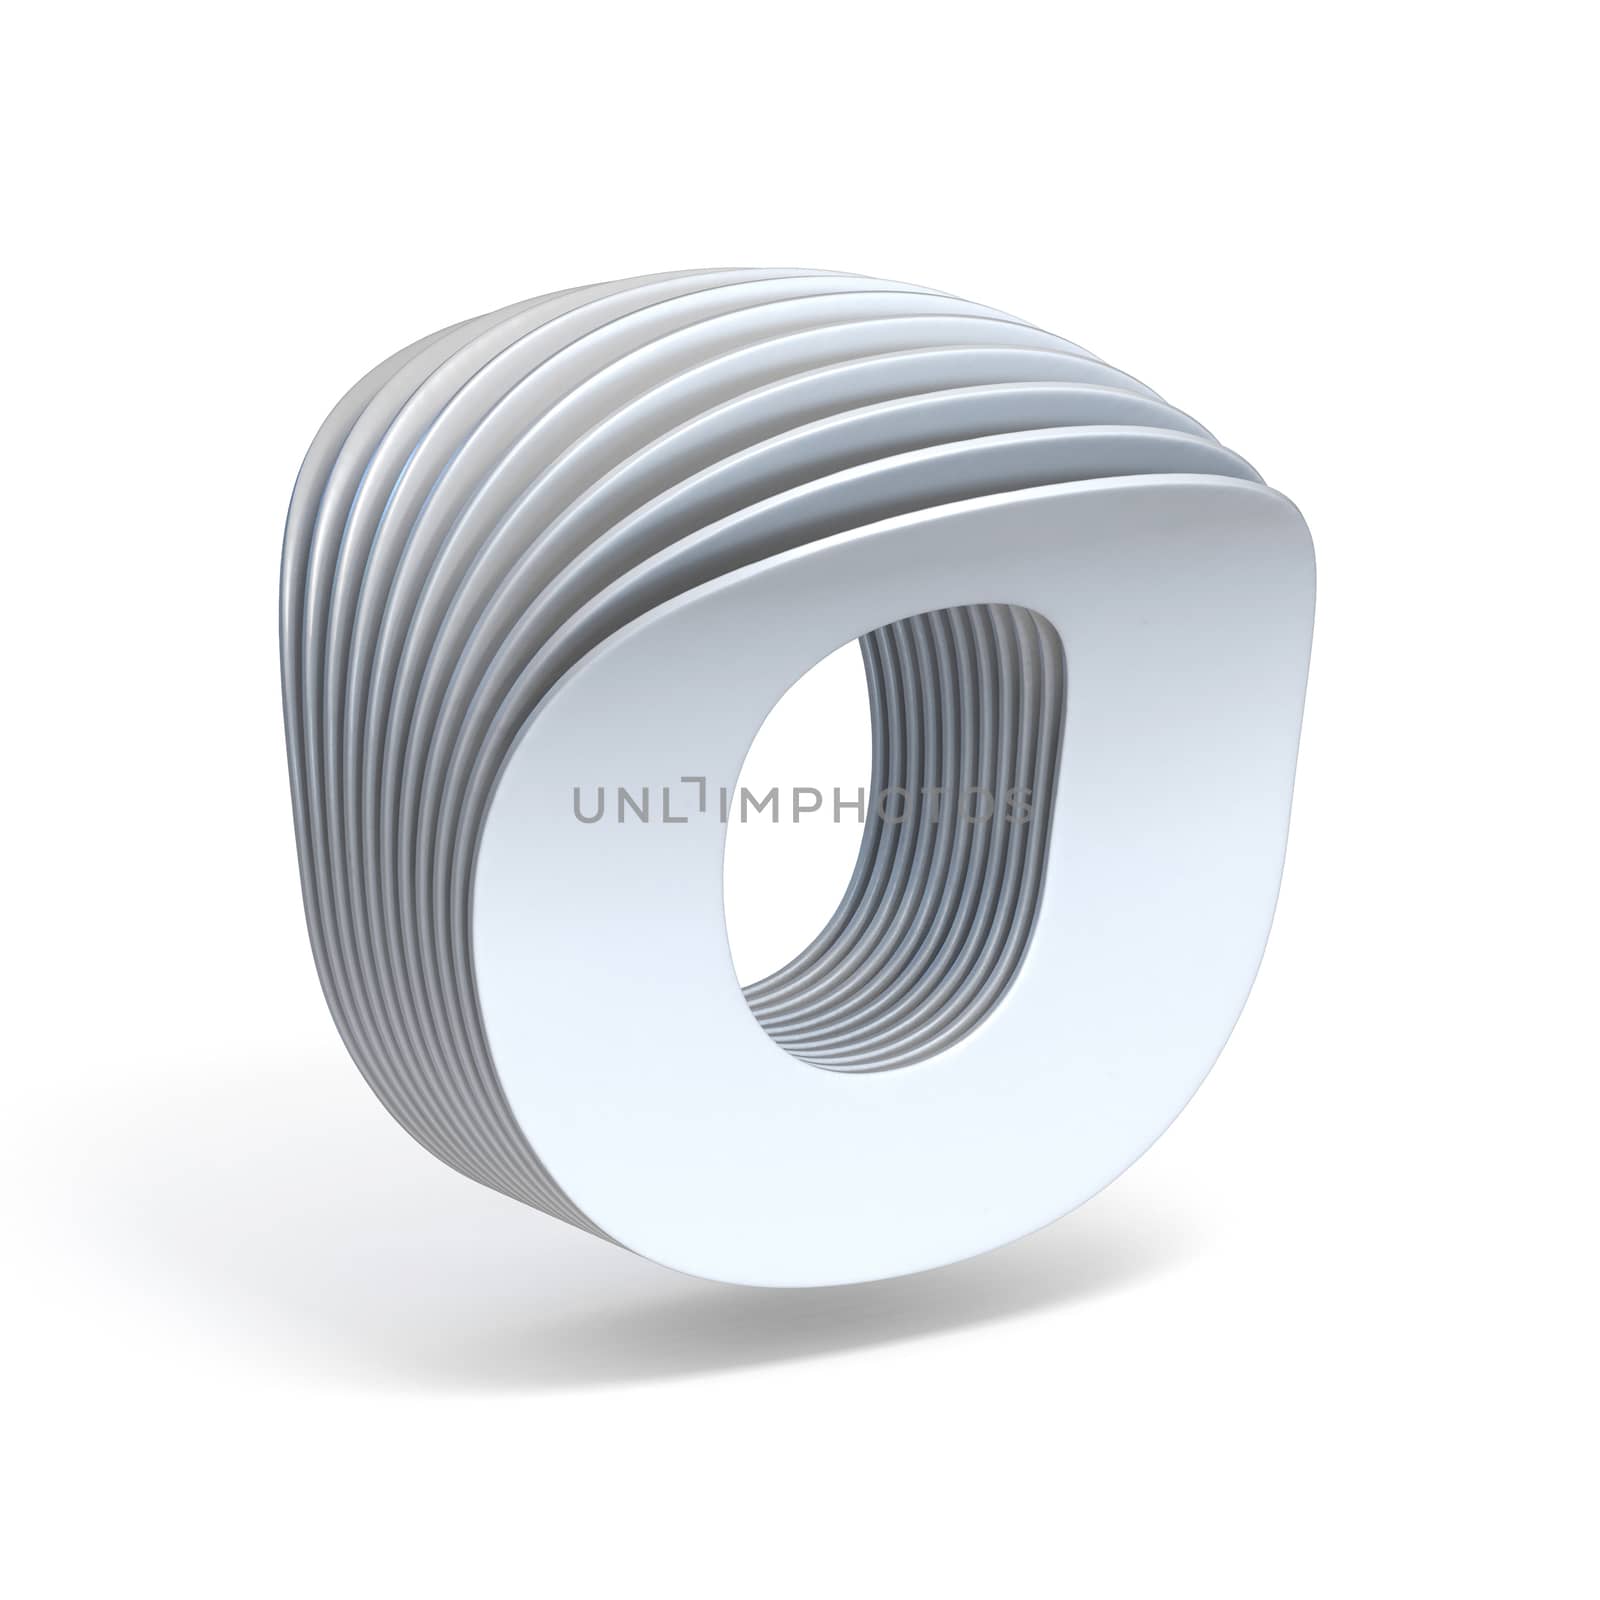 Curved paper sheets Letter O 3D render illustration isolated on white background